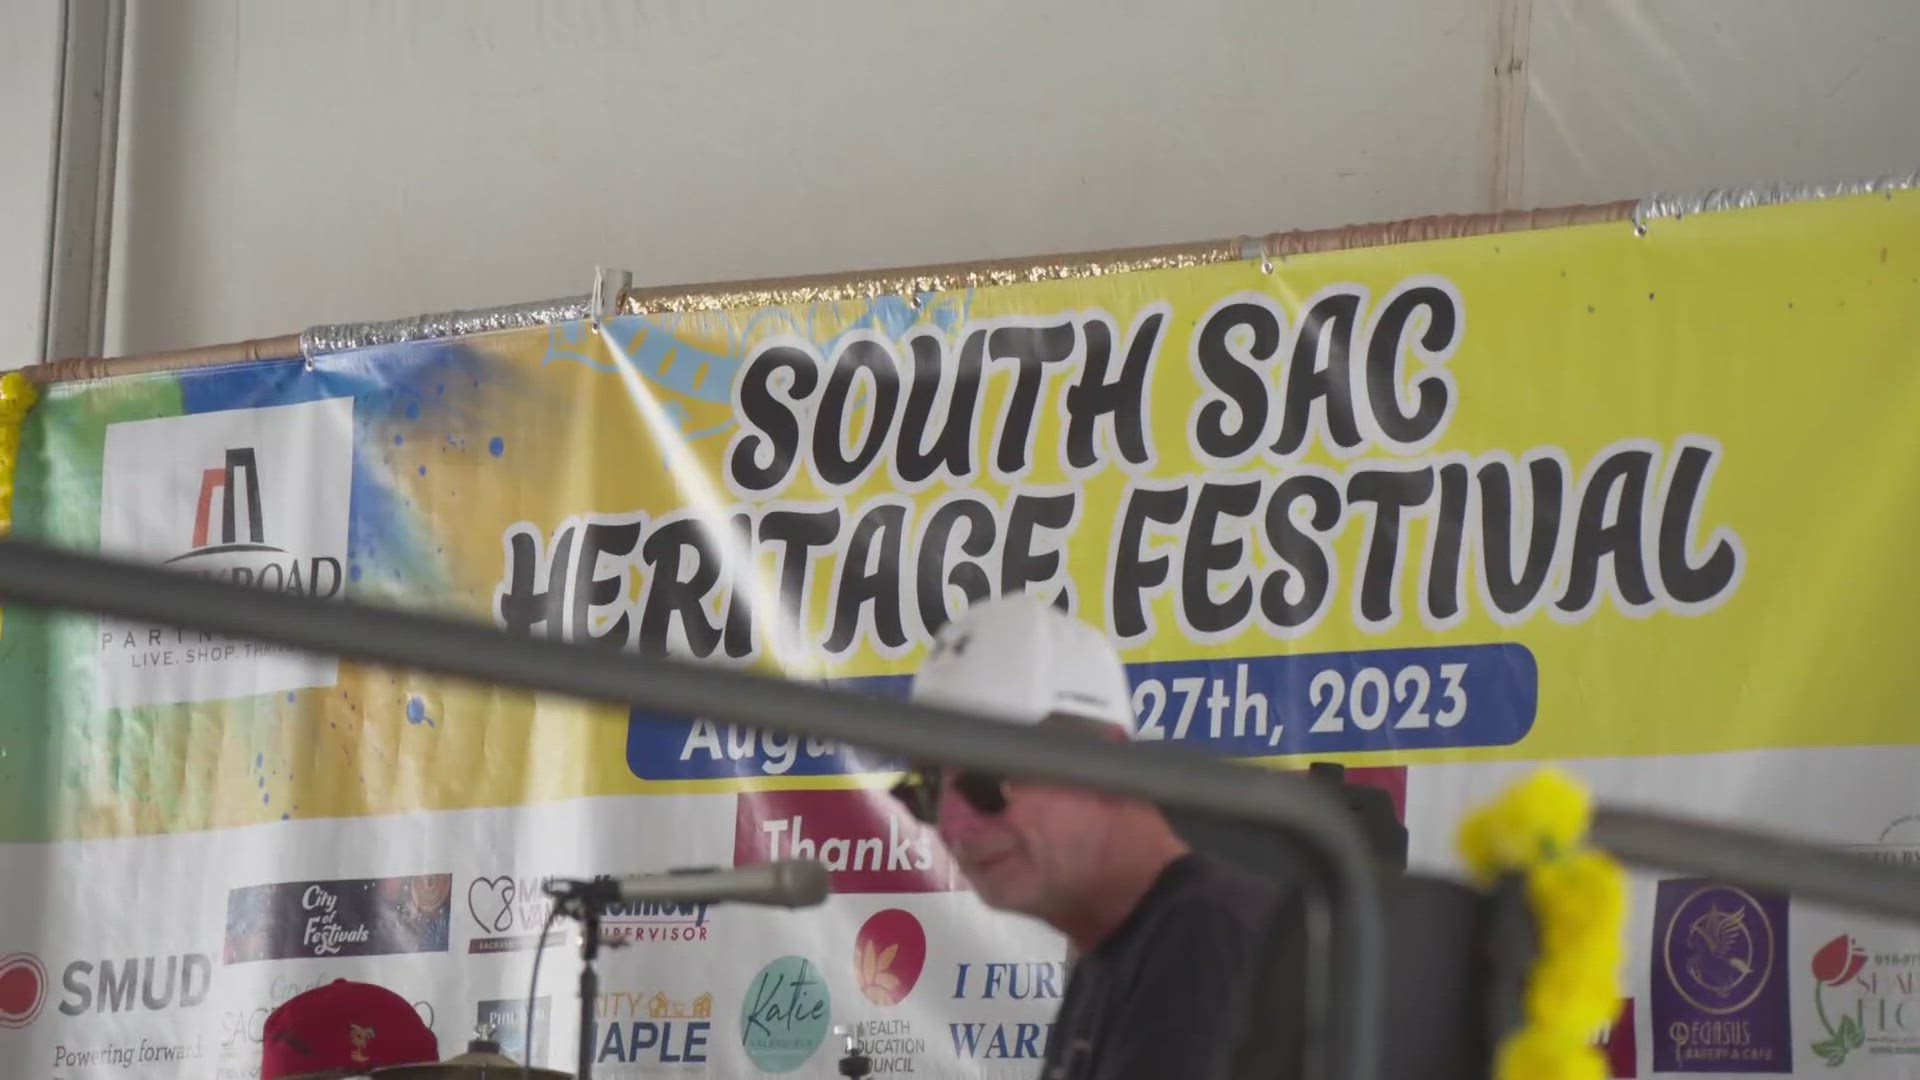 The South Sacramento Heritage Festival wrapped up its final day, providing a boost for businesses who were impacted by the pandemic and crime.